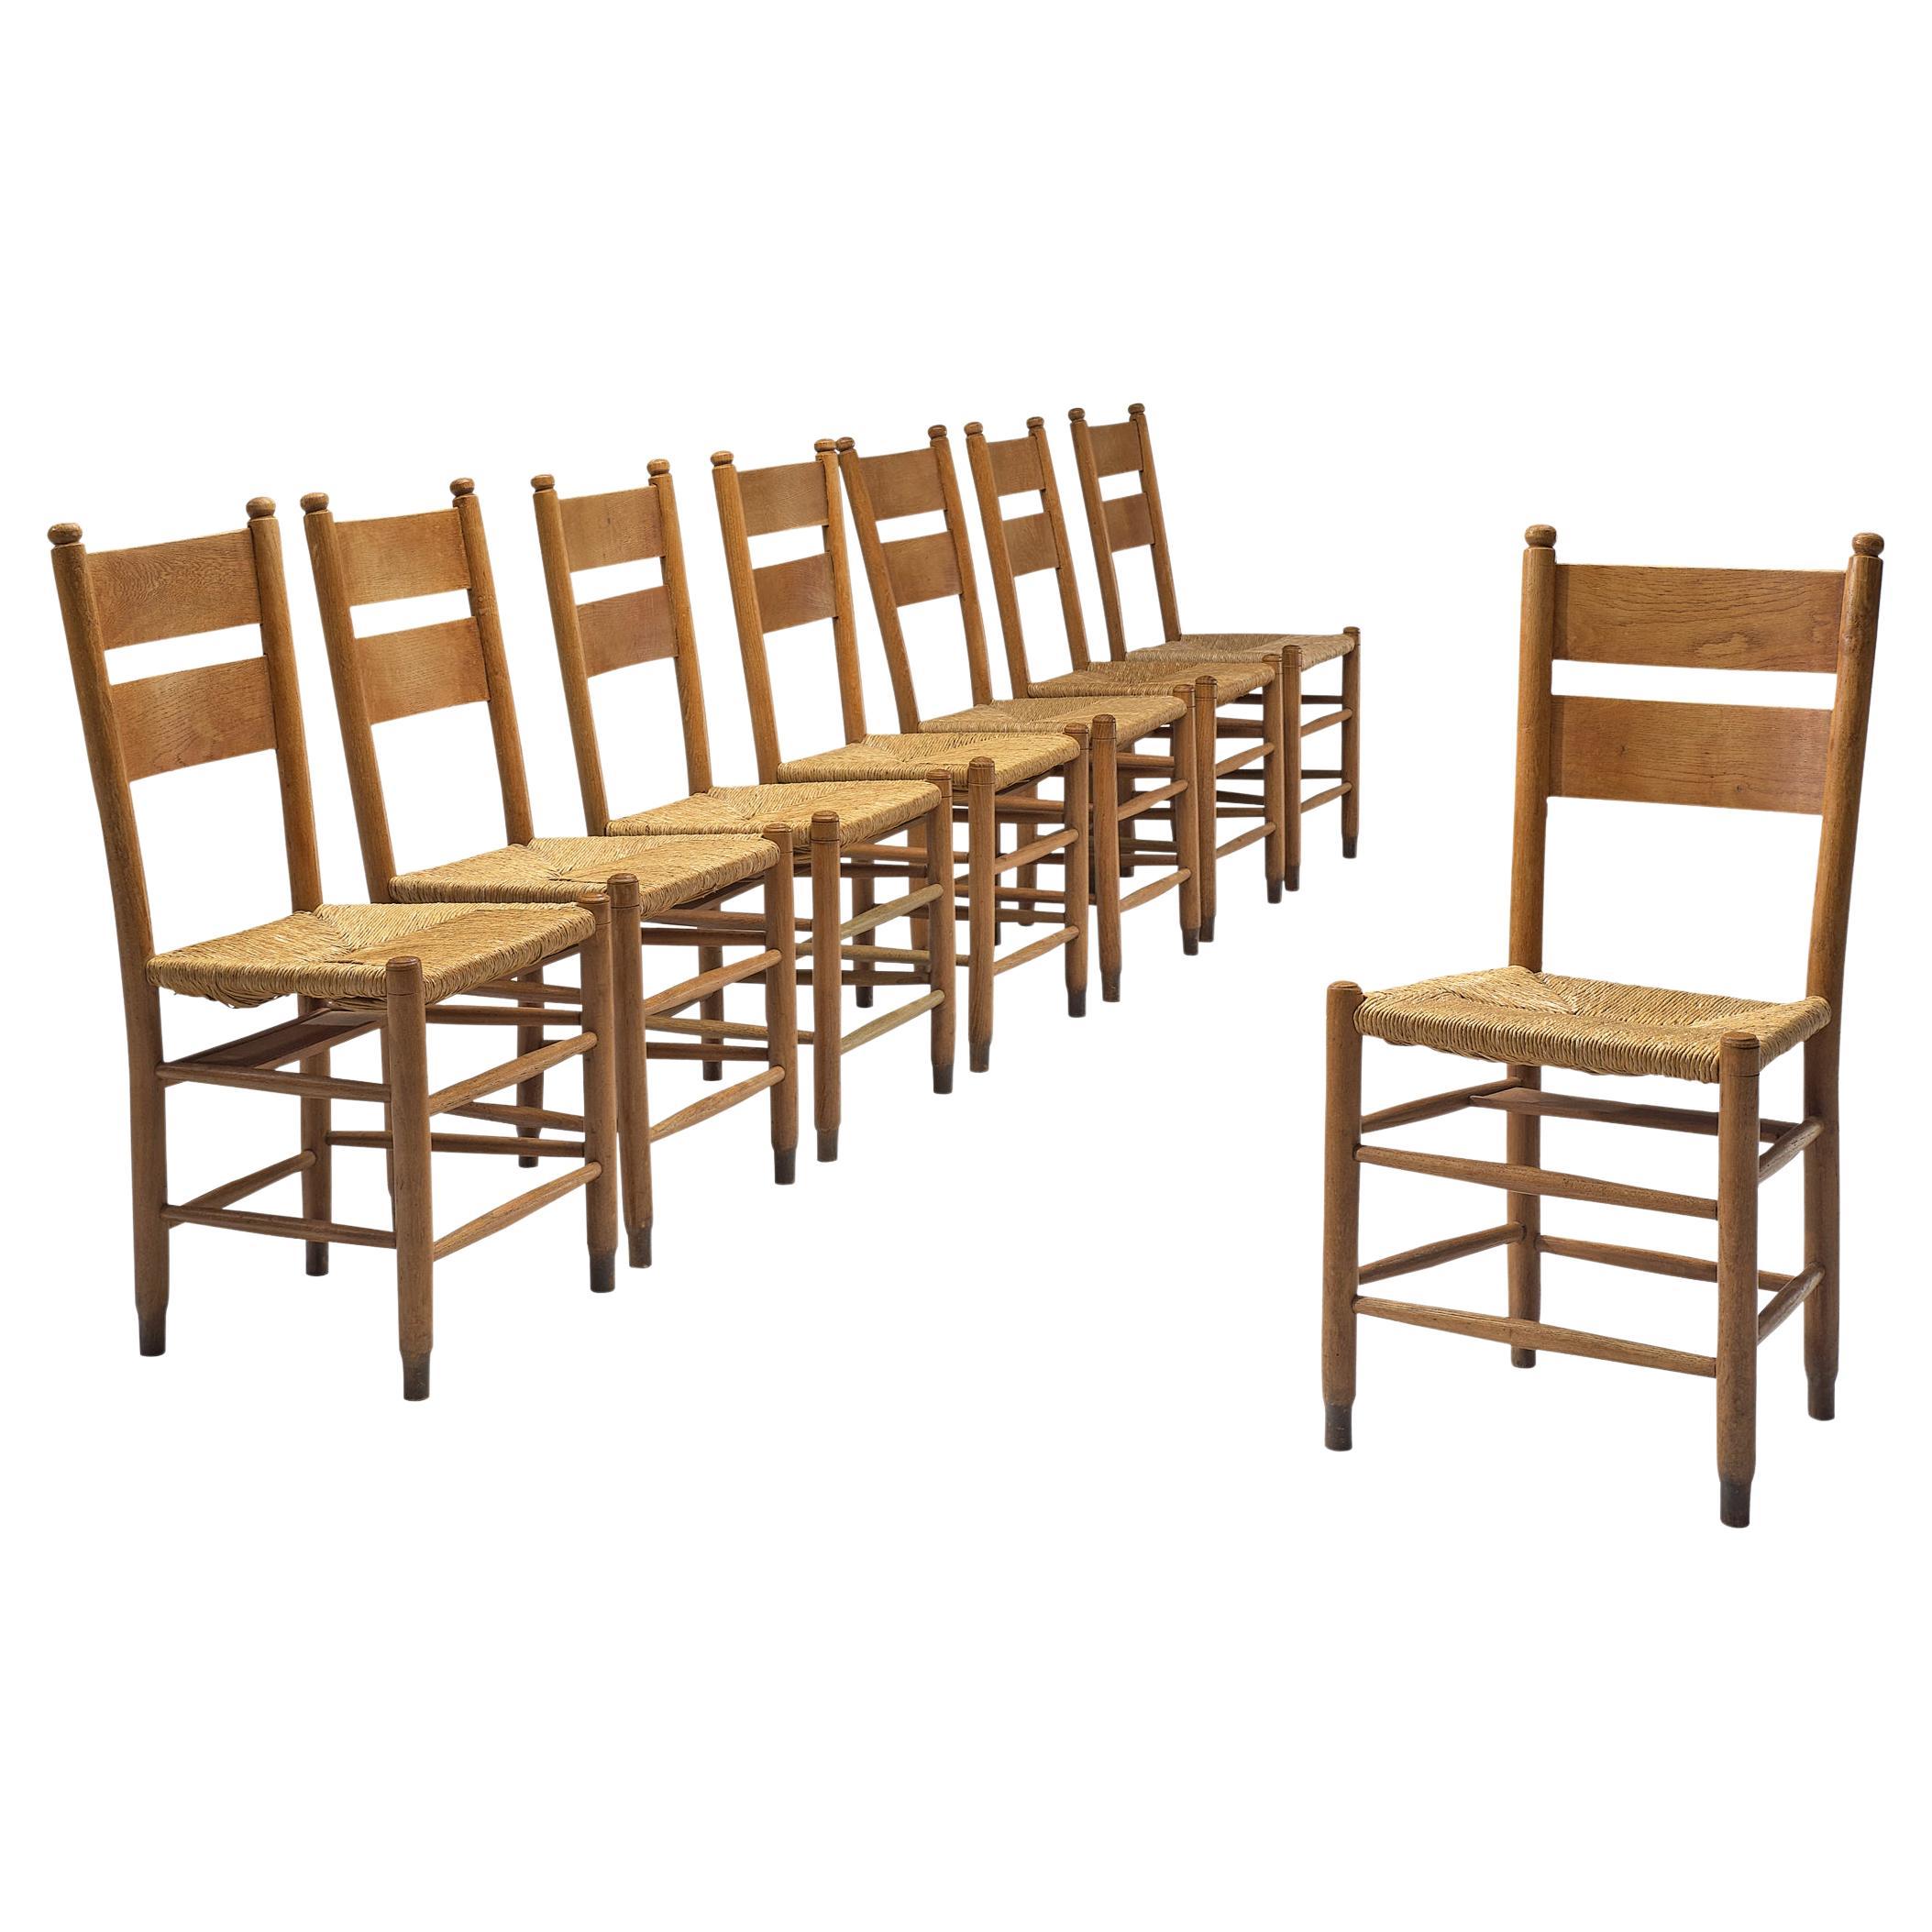 Rustic Danish Chairs in Straw and Oak